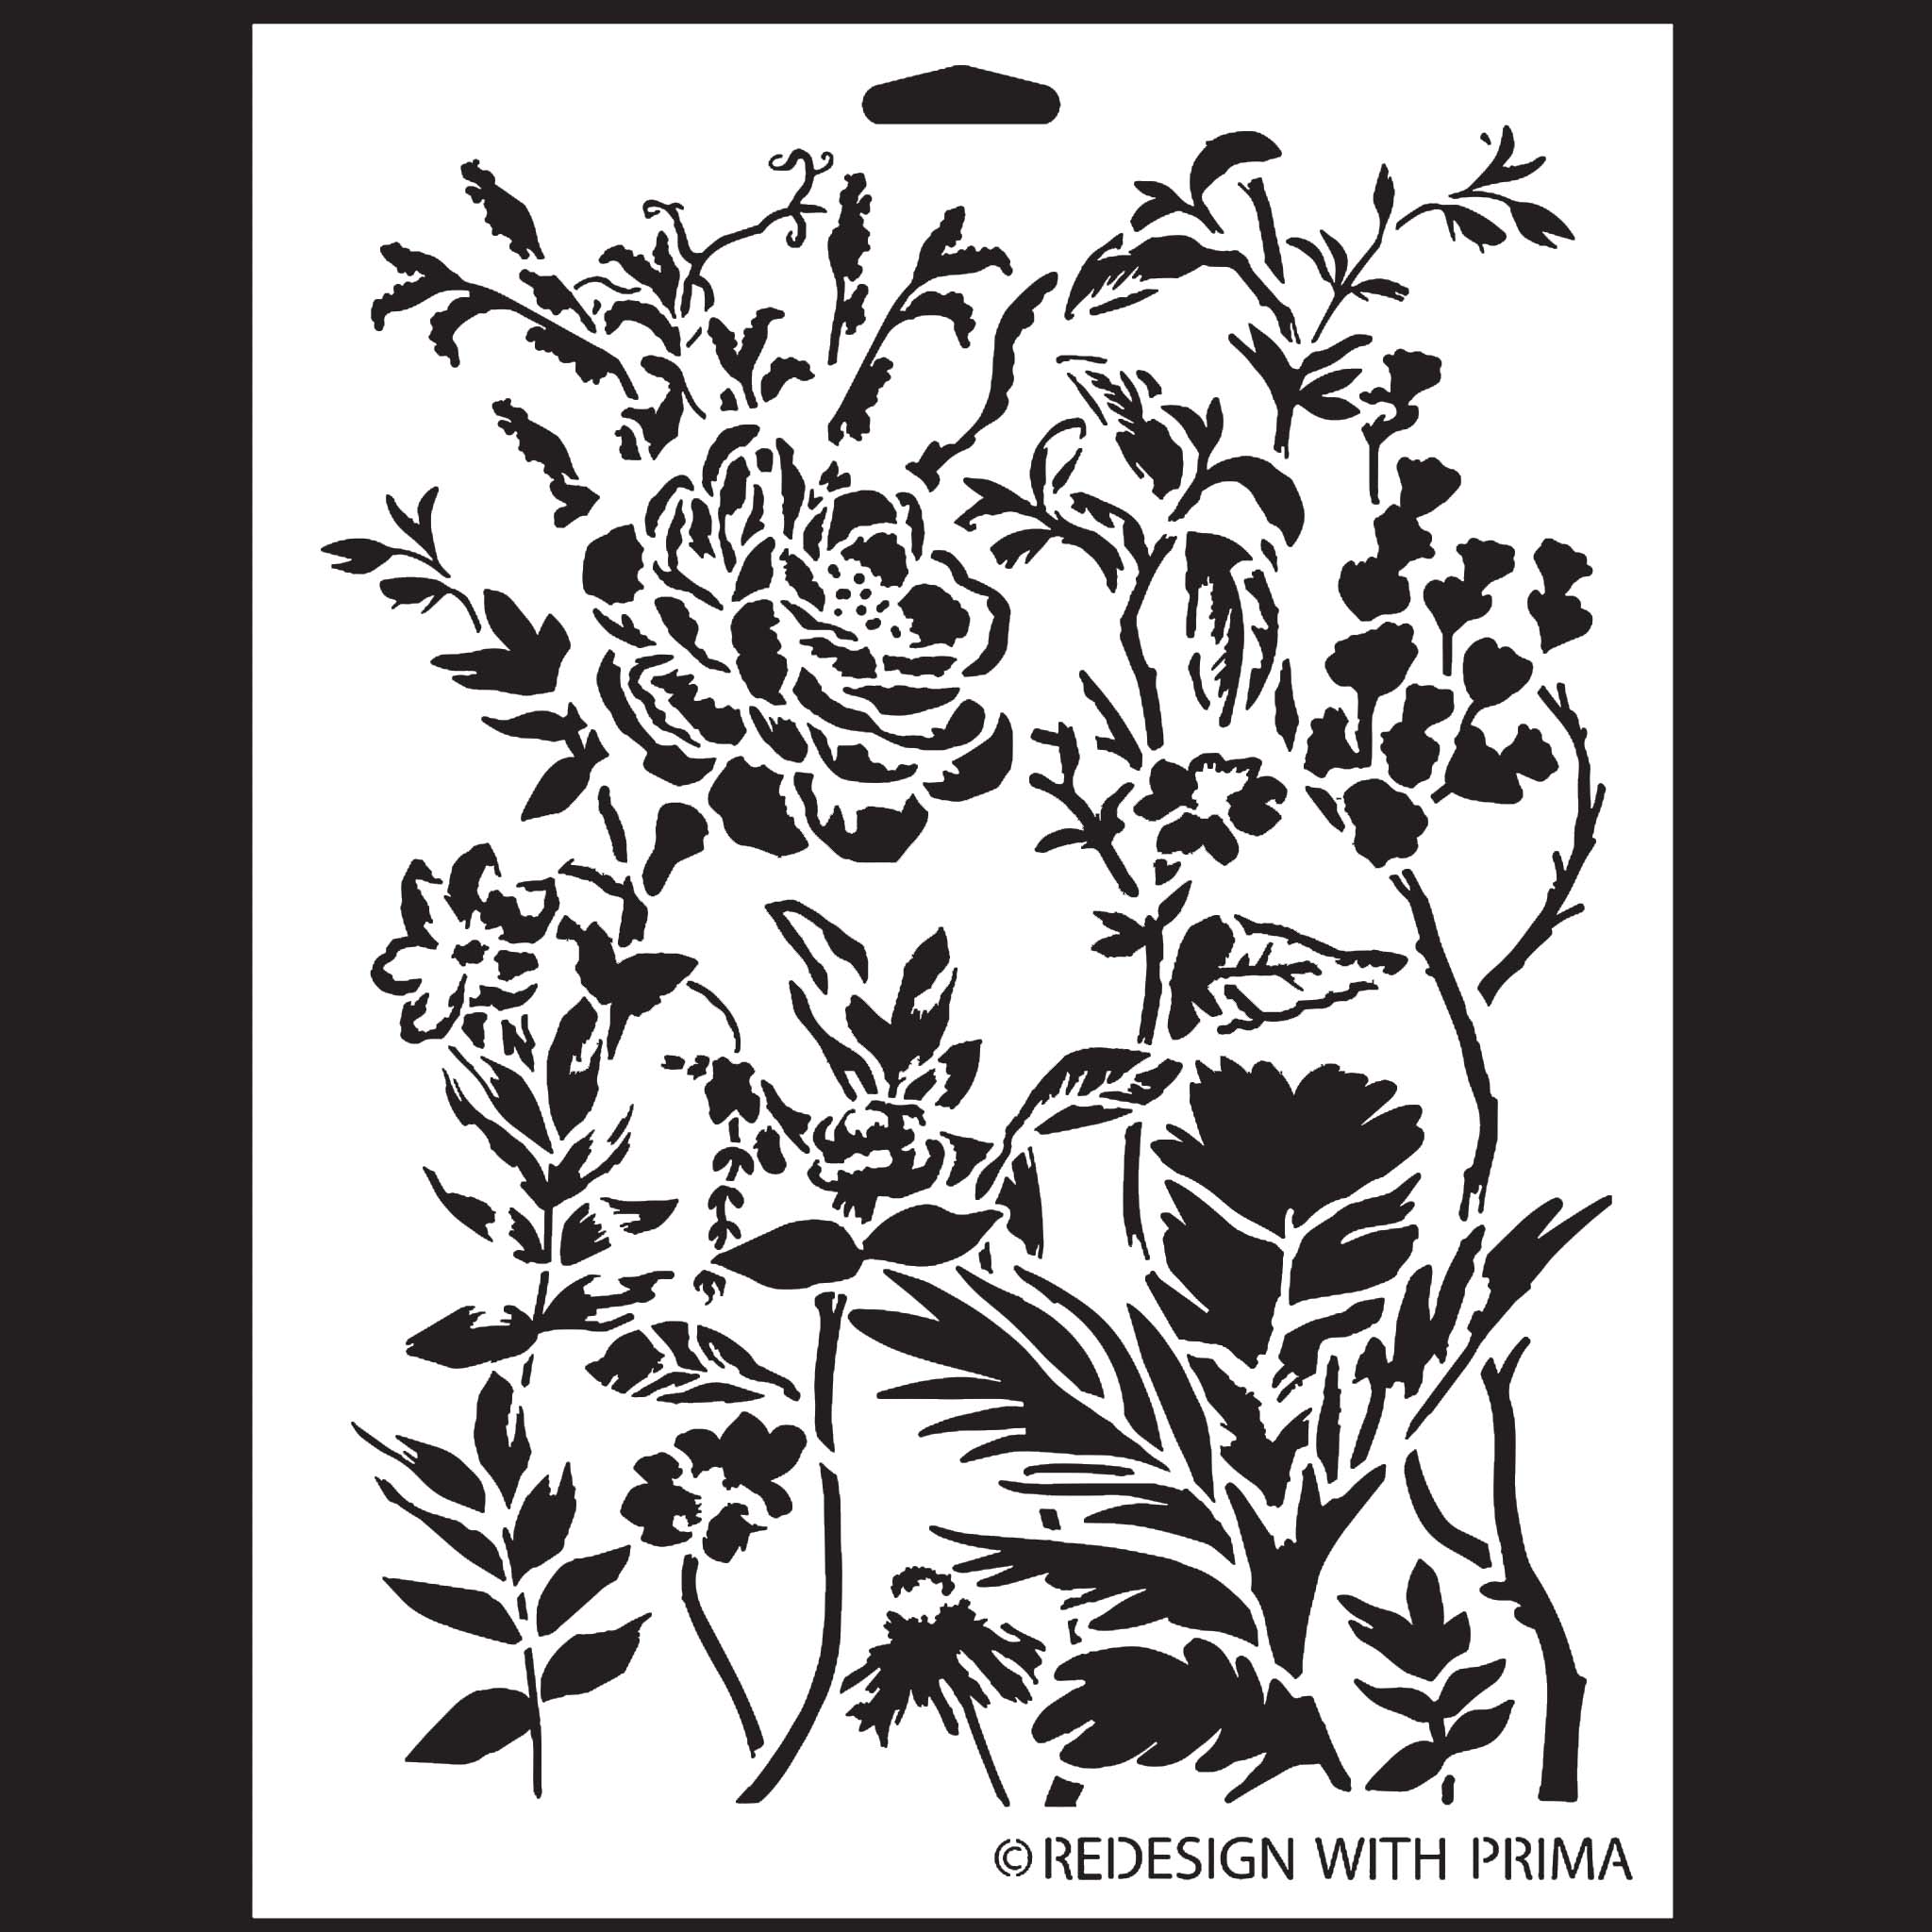 A white stencil against a black background of a delicate floral design that features small blossoms and large roses.